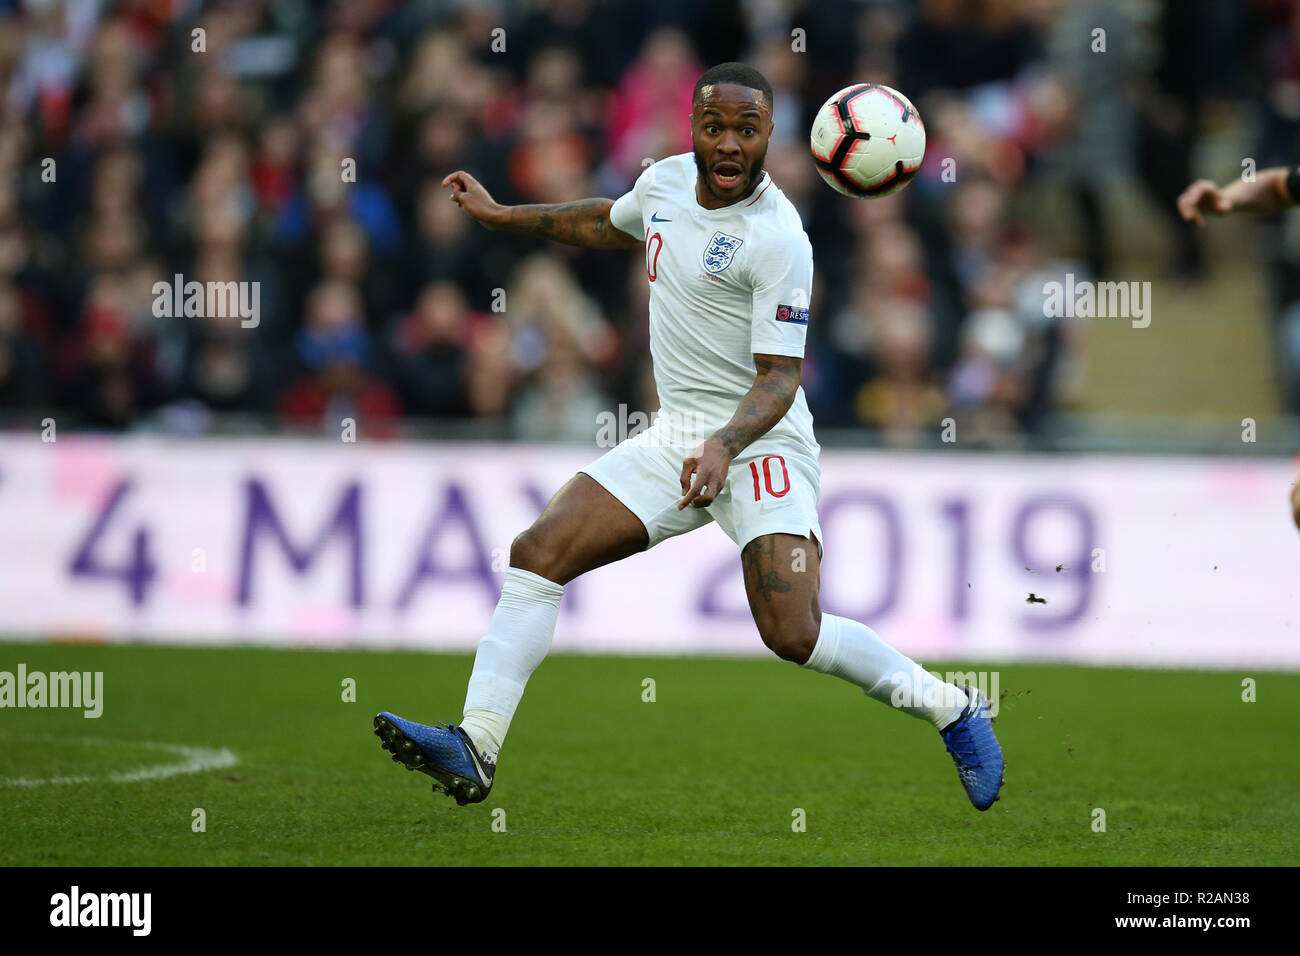 London, UK. 18th November 2018. London, UK. 18th November 2018. Raheem Sterling of England in action. UEFA Nations league A, group 4 match, England v Croatia at Wembley Stadium in London on Sunday 18th November 2018.  Please note images are for Editorial Use Only. pic by Andrew Orchard/Alamy Live news Credit: Andrew Orchard sports photography/Alamy Live News Stock Photo